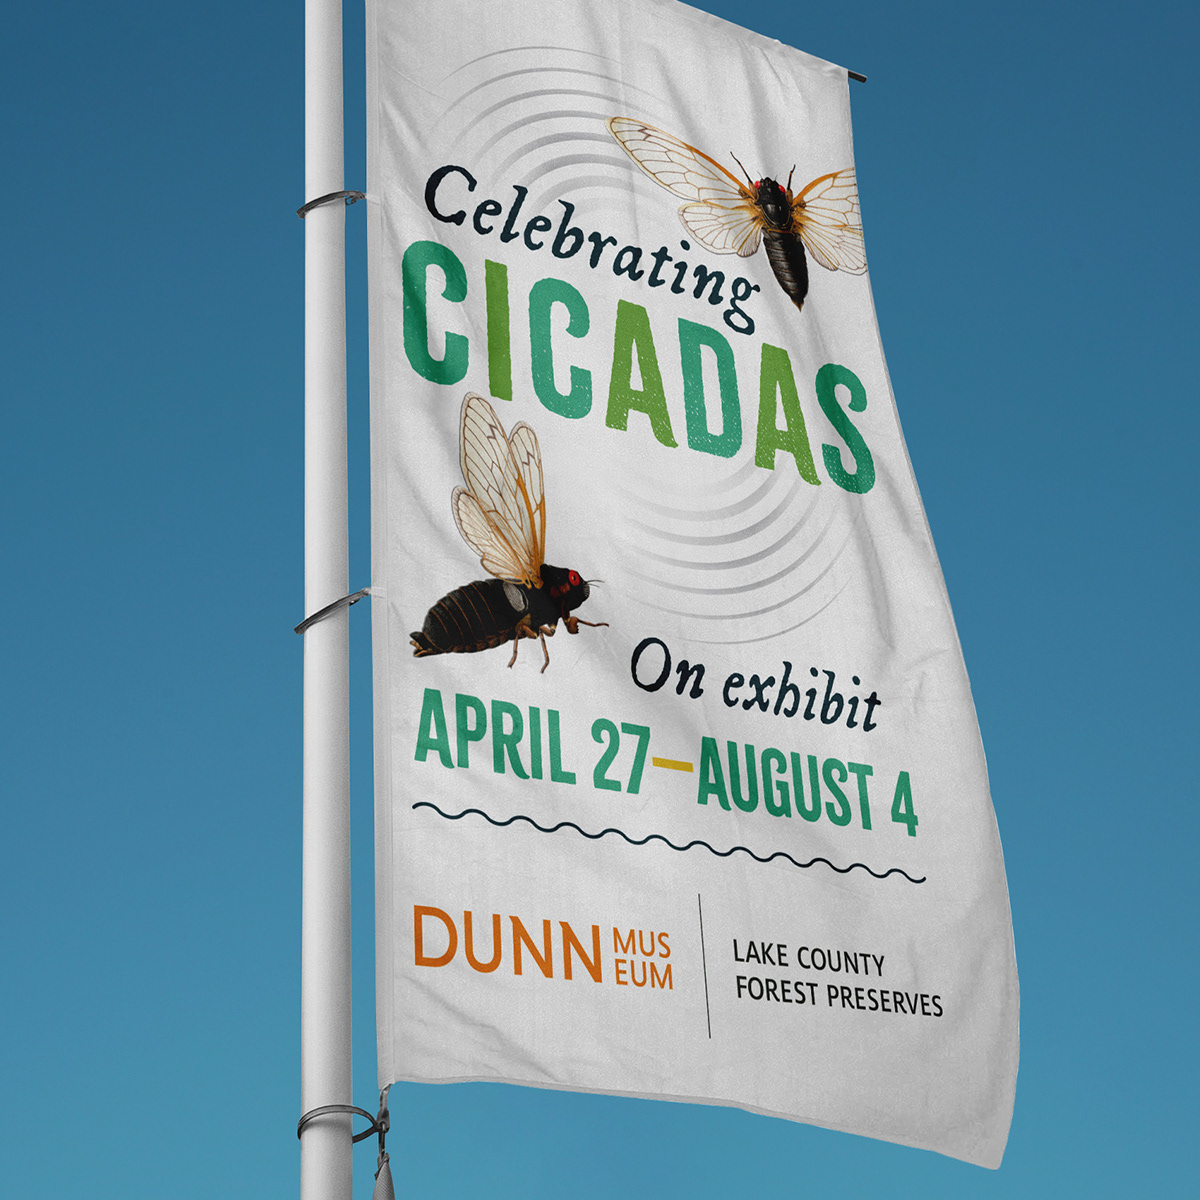 Outdoor banner advertising a museum exhibition titled Celebrating Cicadas